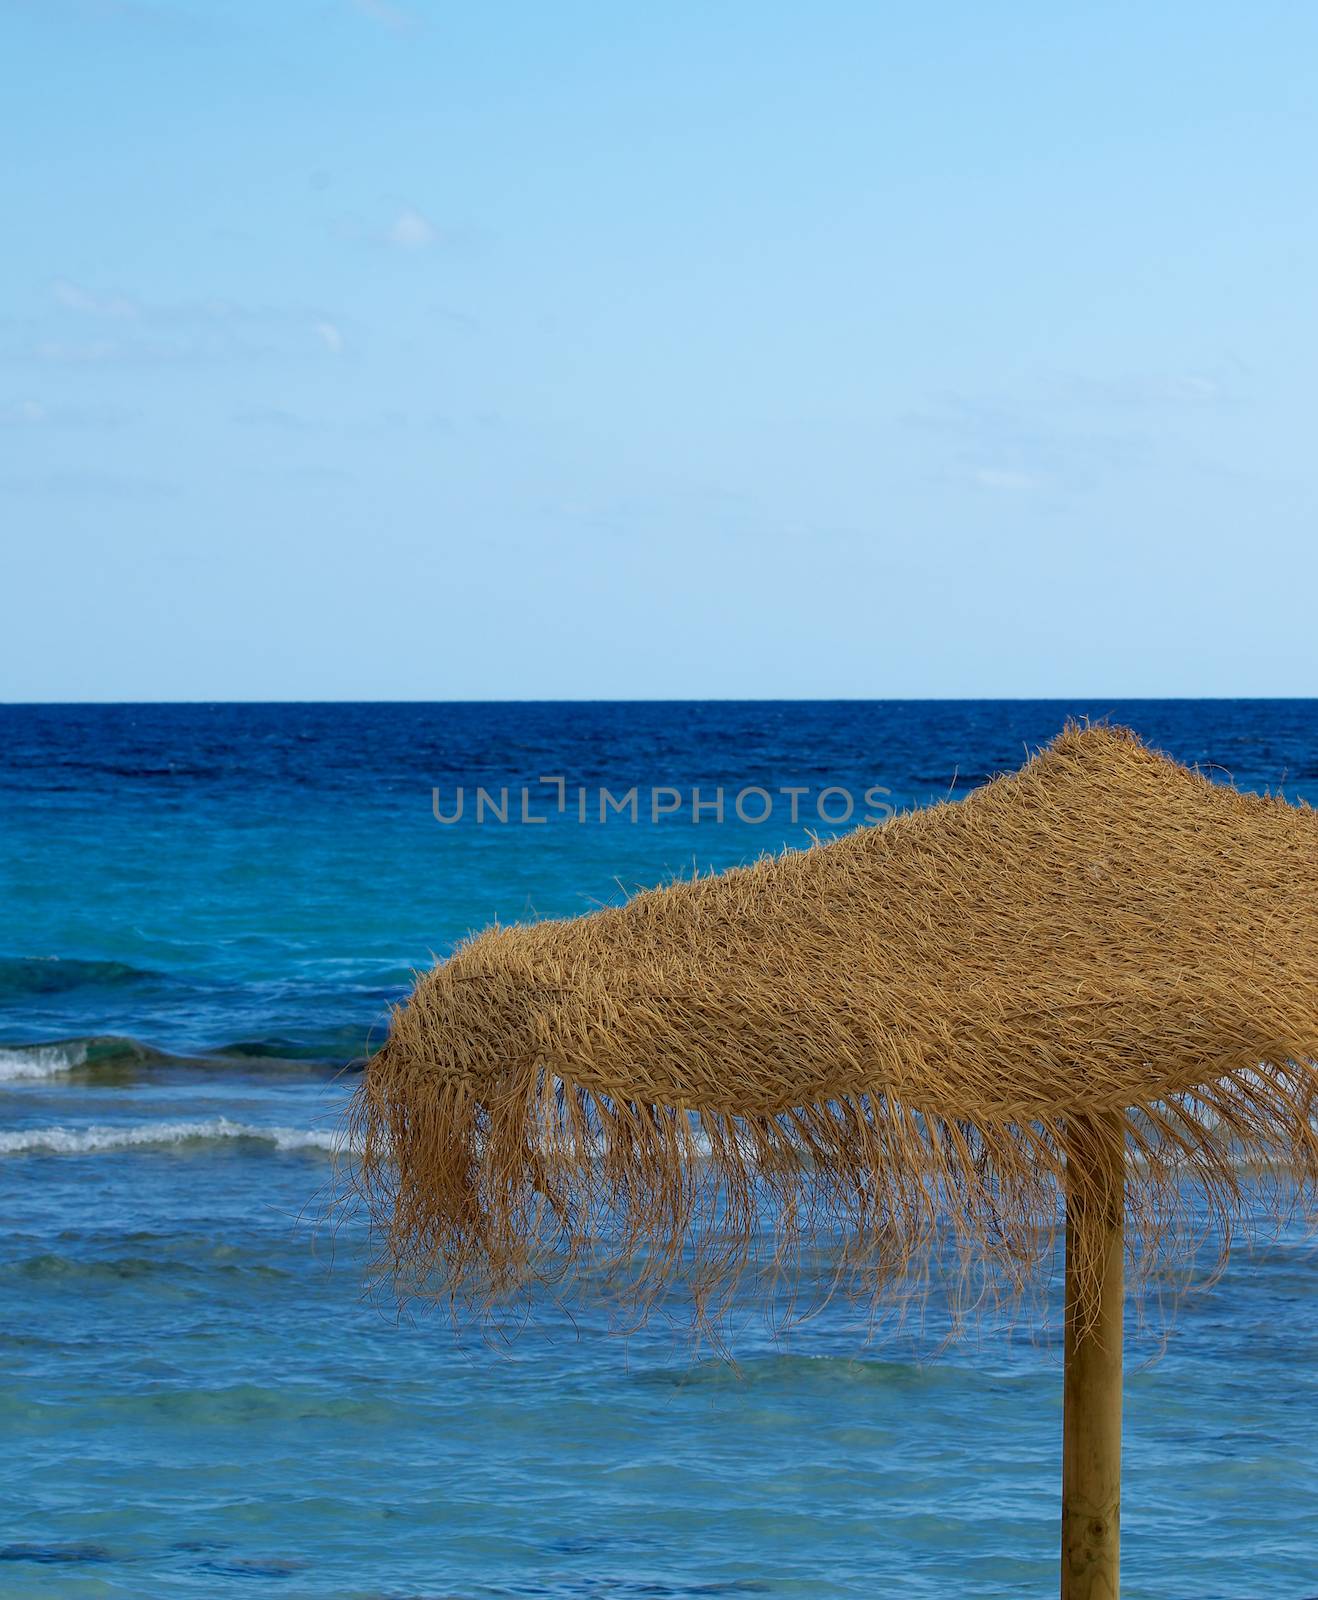 Thatched Umbrella Overlooking on Turquoise Sea Outdoors